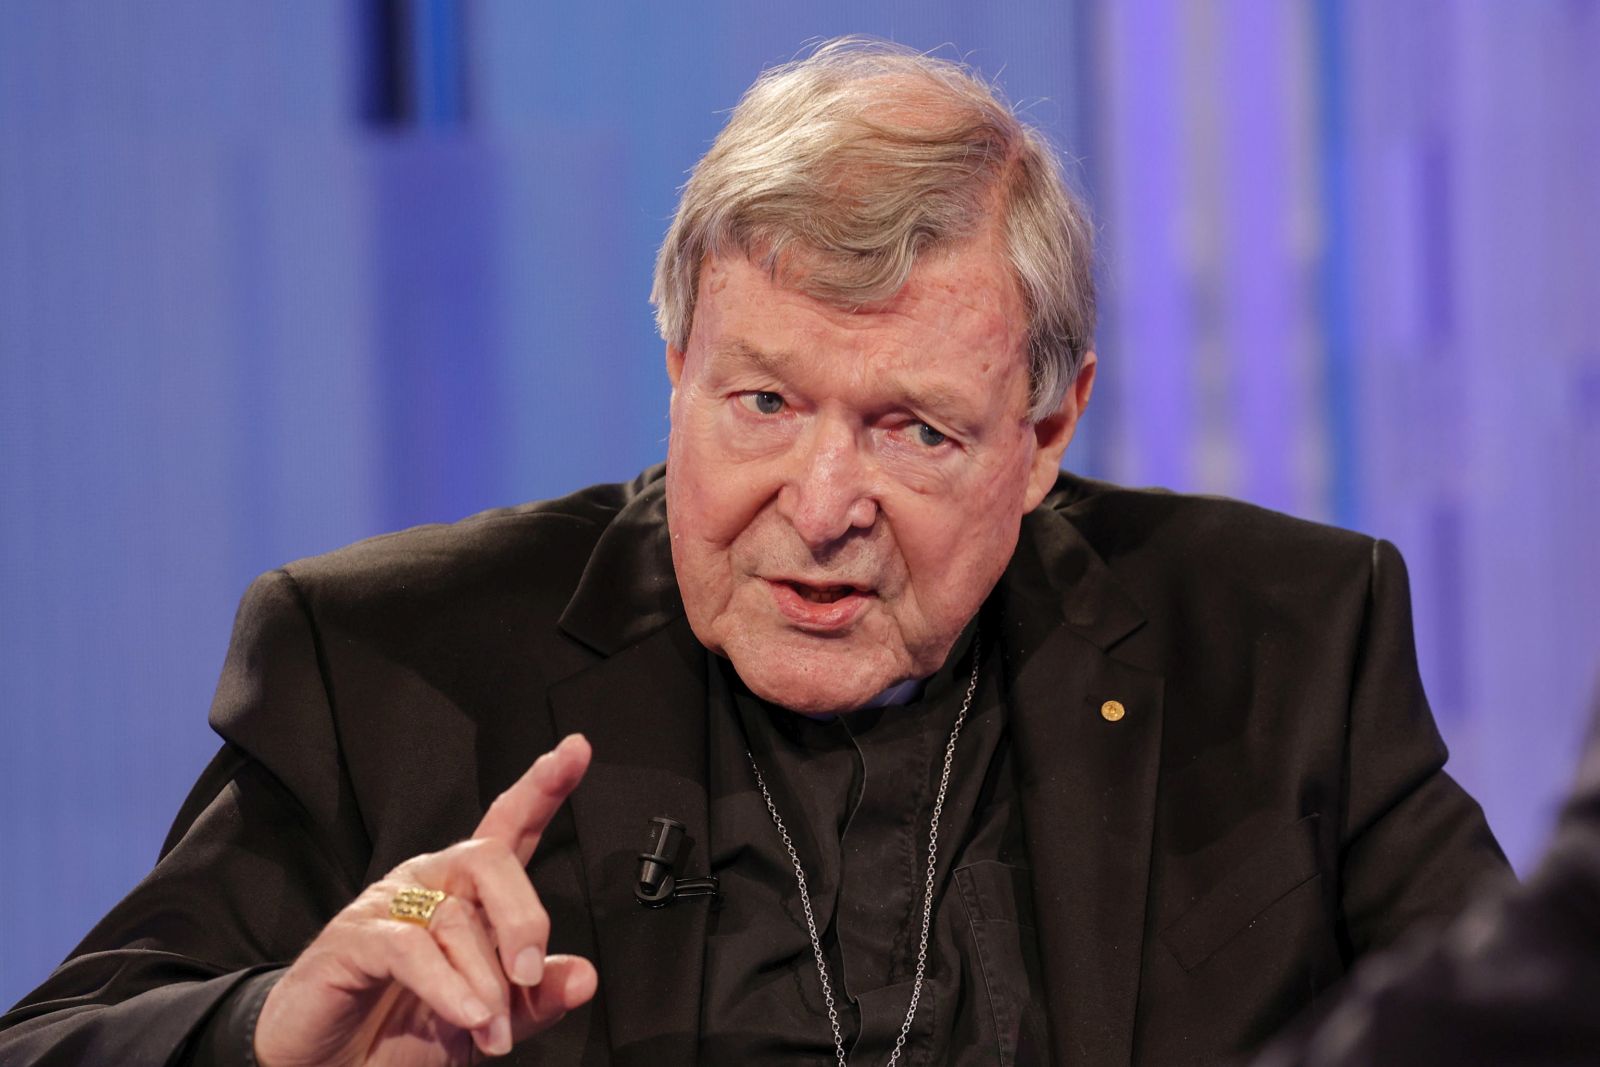 epa10399016 (FILE) - Australian Cardinal George Pell attends the Italian Raiuno TV program 'Porta a Porta' hosted by Italian journalist Bruno Vespa, in Rome, Italy, 04 November 2021. According to a statement from the Catholic Archdiocese of Sydney, Cardinal George Pell died at age 81 on 11 January 2023 in Rome.  EPA/GIUSEPPE LAMI *** Local Caption *** 57275379